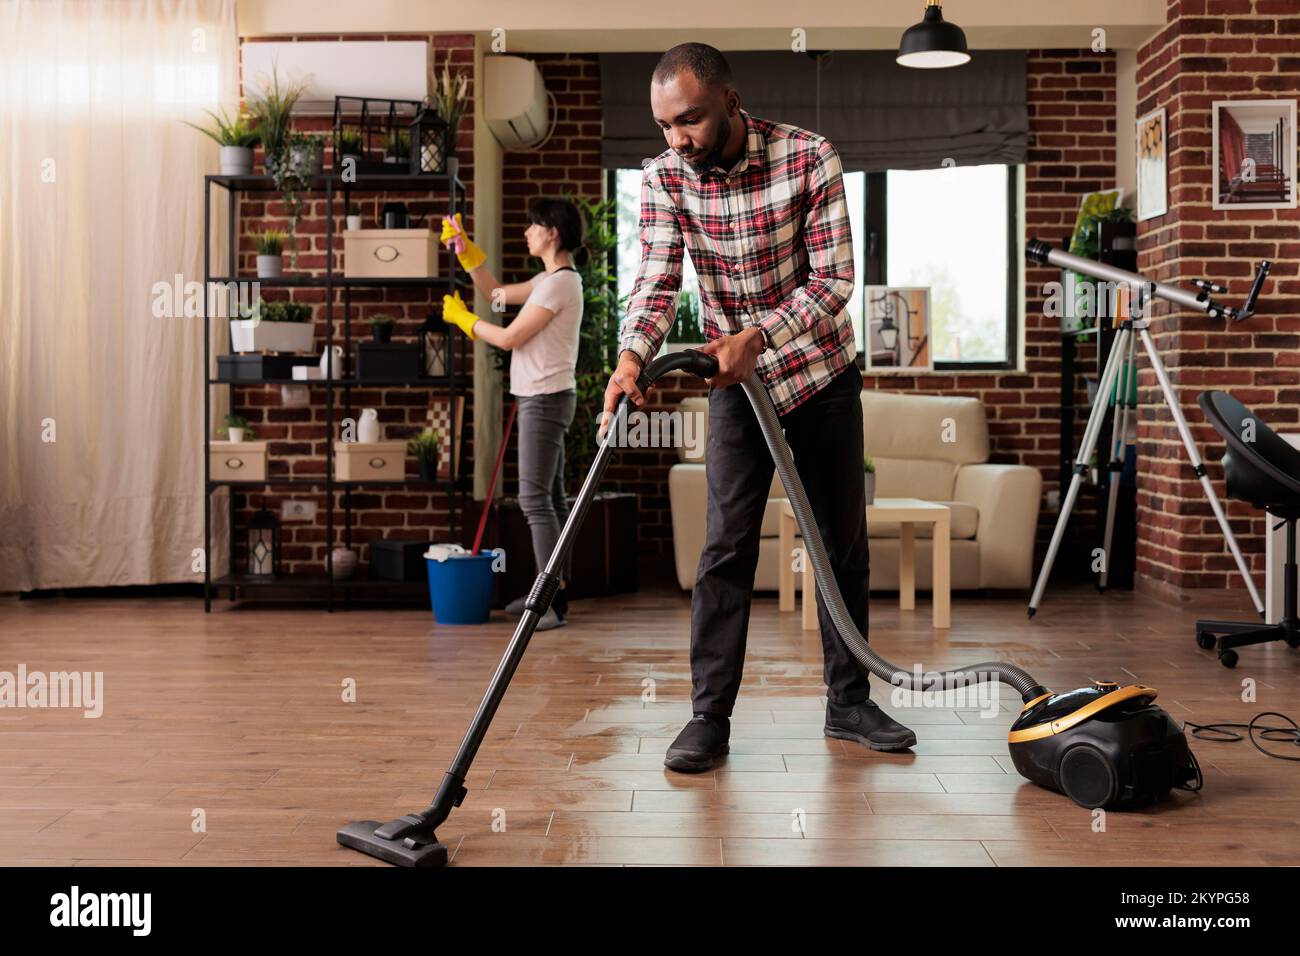 African american man vacuuming floor at home while female roommate dusts shelves in background. Woman wearing rubber gloves while cleaning urban apartment, cleaning day. Stock Photo